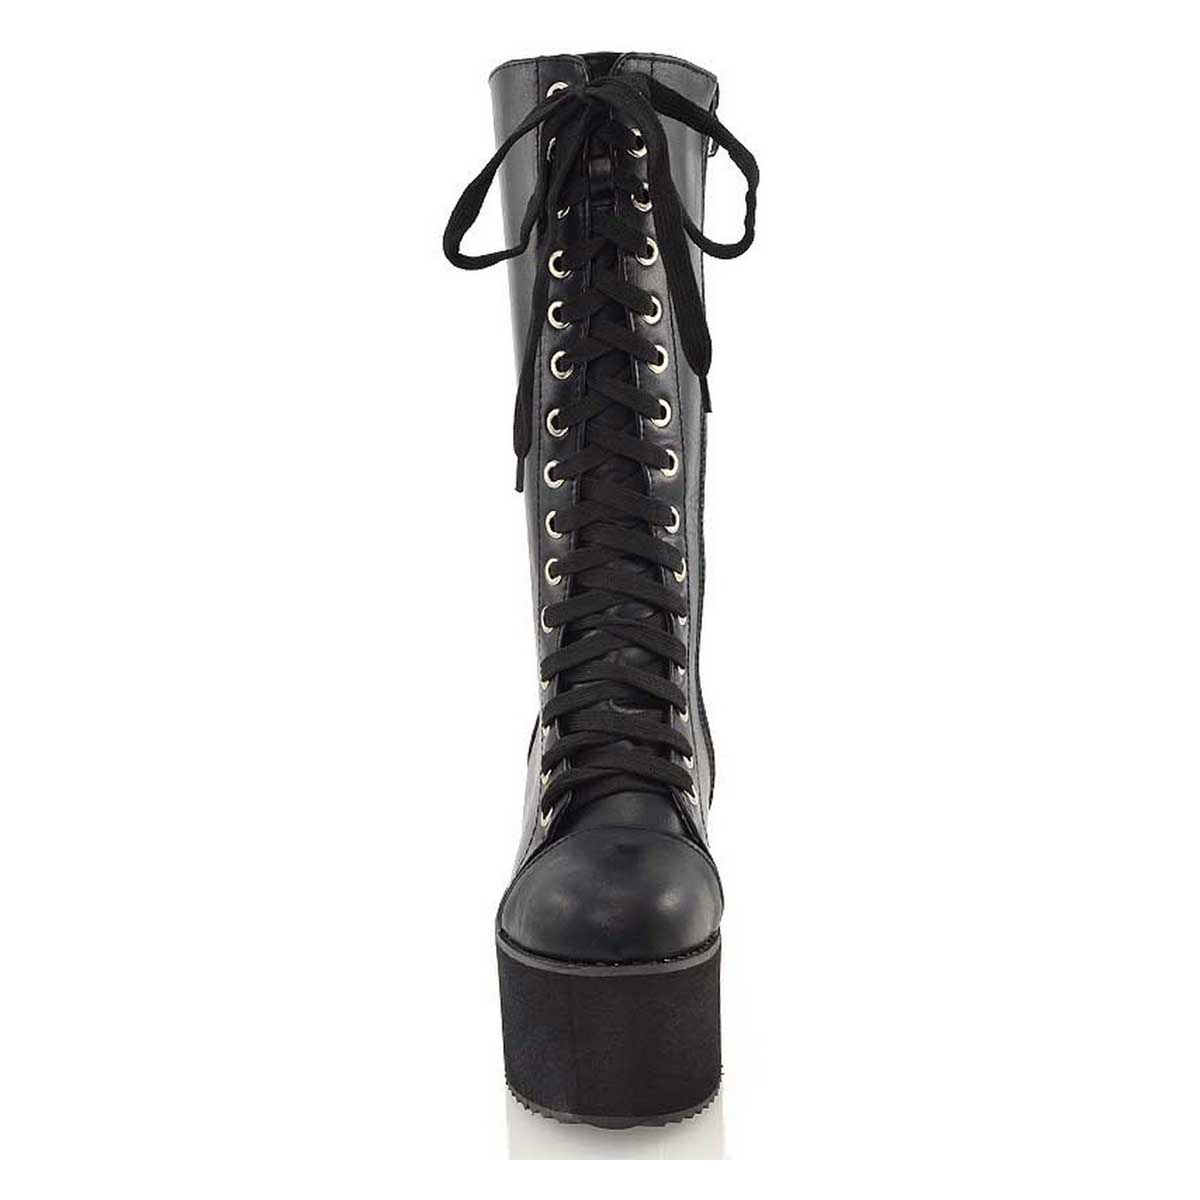 LIZ'S CHUNKY SOLE LACE UP KNEE HIGH BIKER WINTER PLATFORM BOOTS IN BLACK FAUX SUEDE